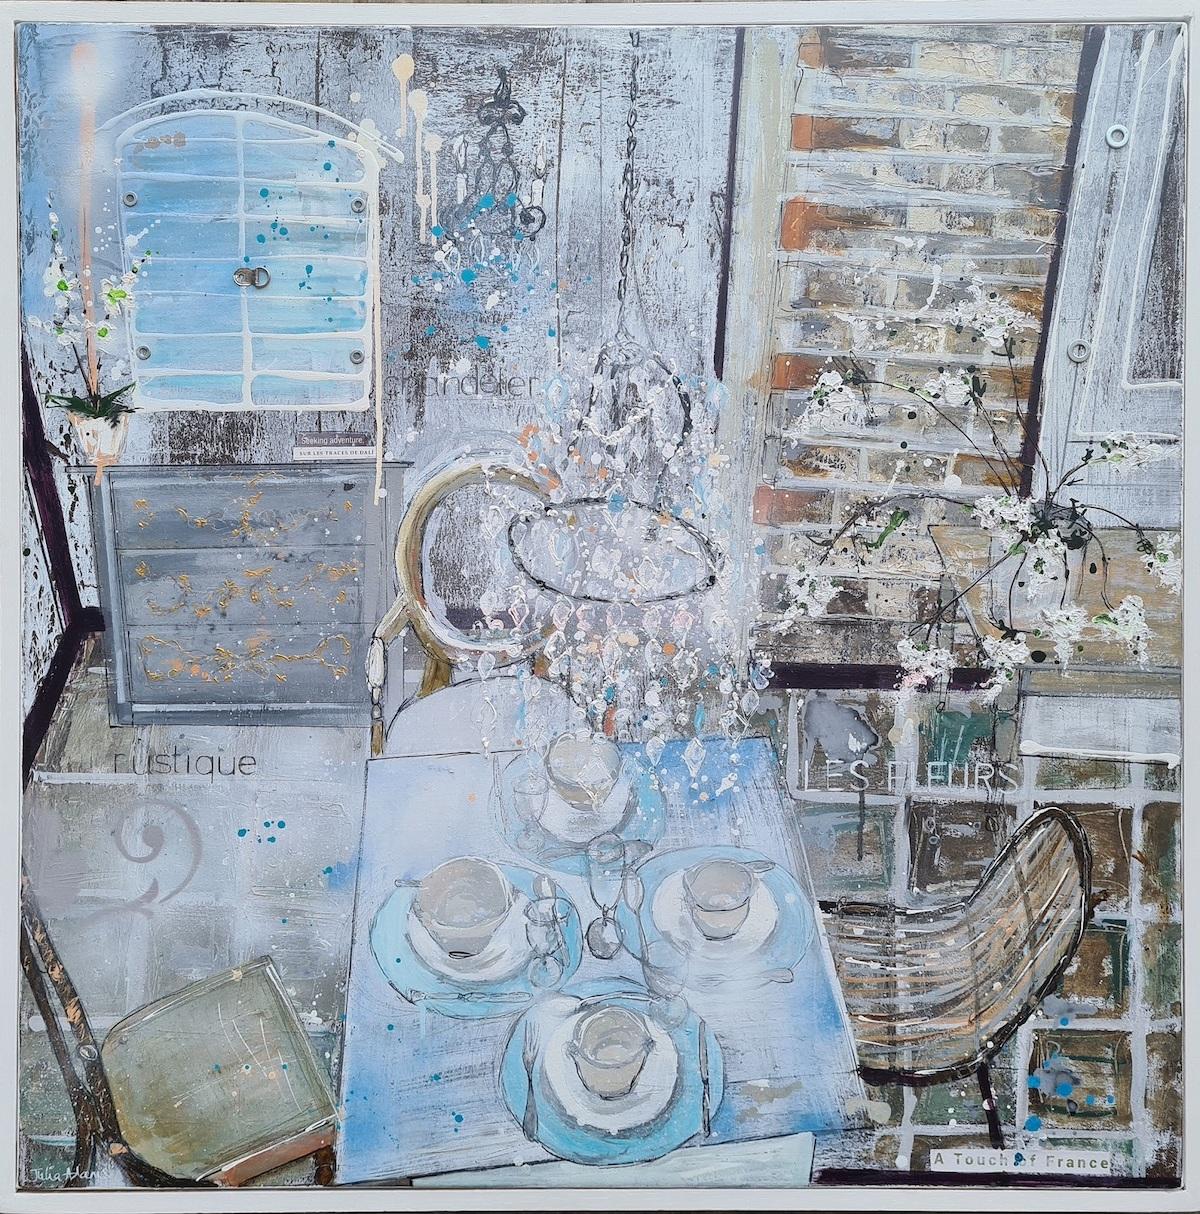 A Touch of France, Interior Art, Blue and Silver Painting, Pop Art - Mixed Media Art by Julia Adams